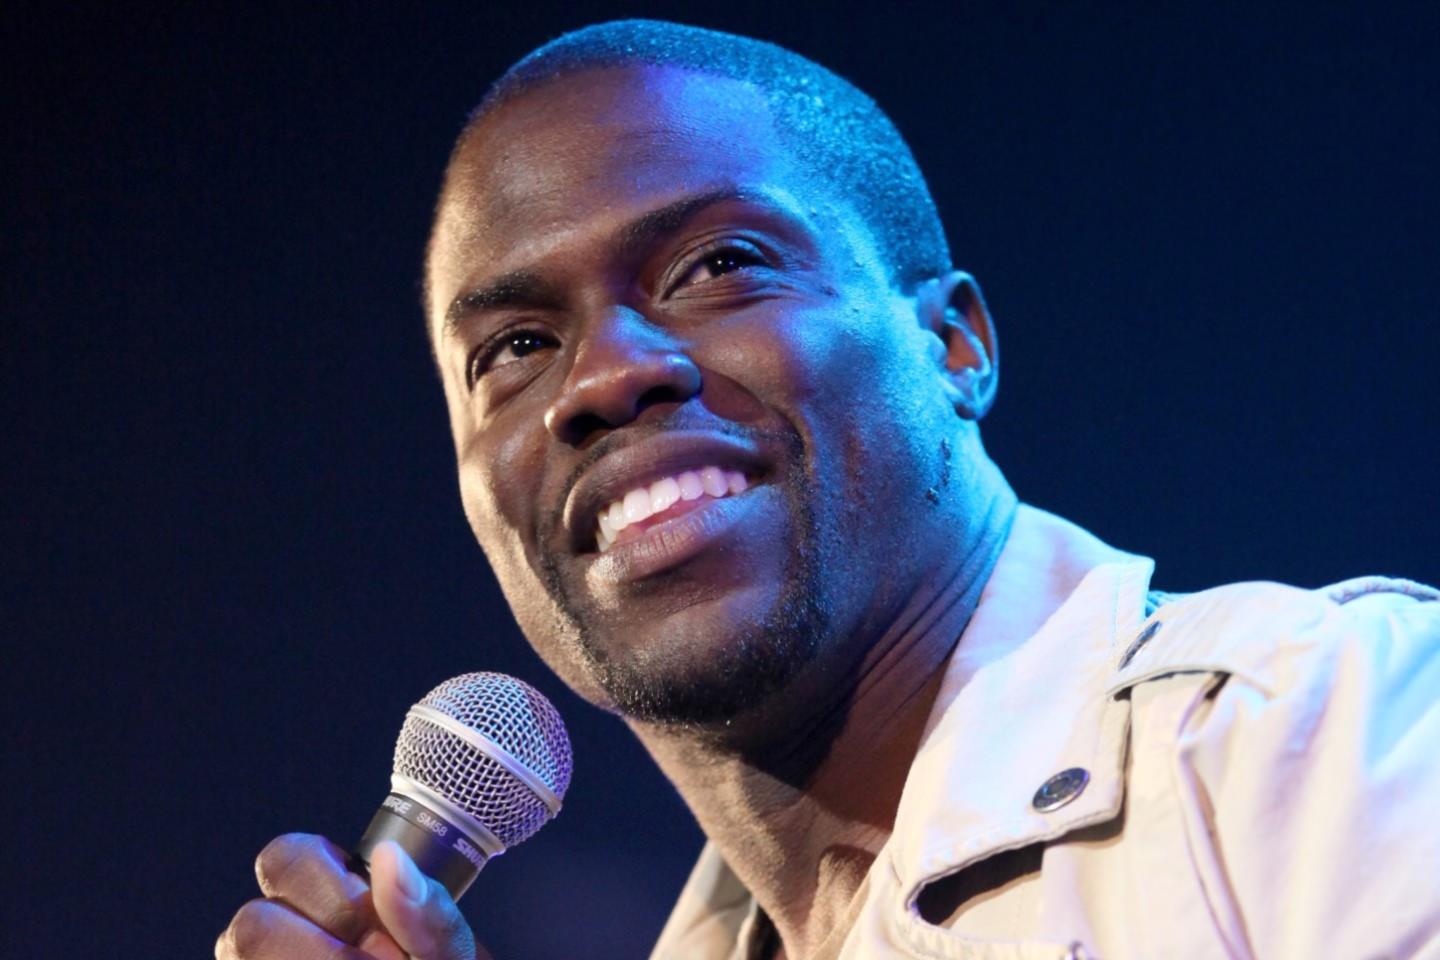 Kevin Hart Tickets Buy or Sell Tickets for Kevin Hart Tour Dates 2022